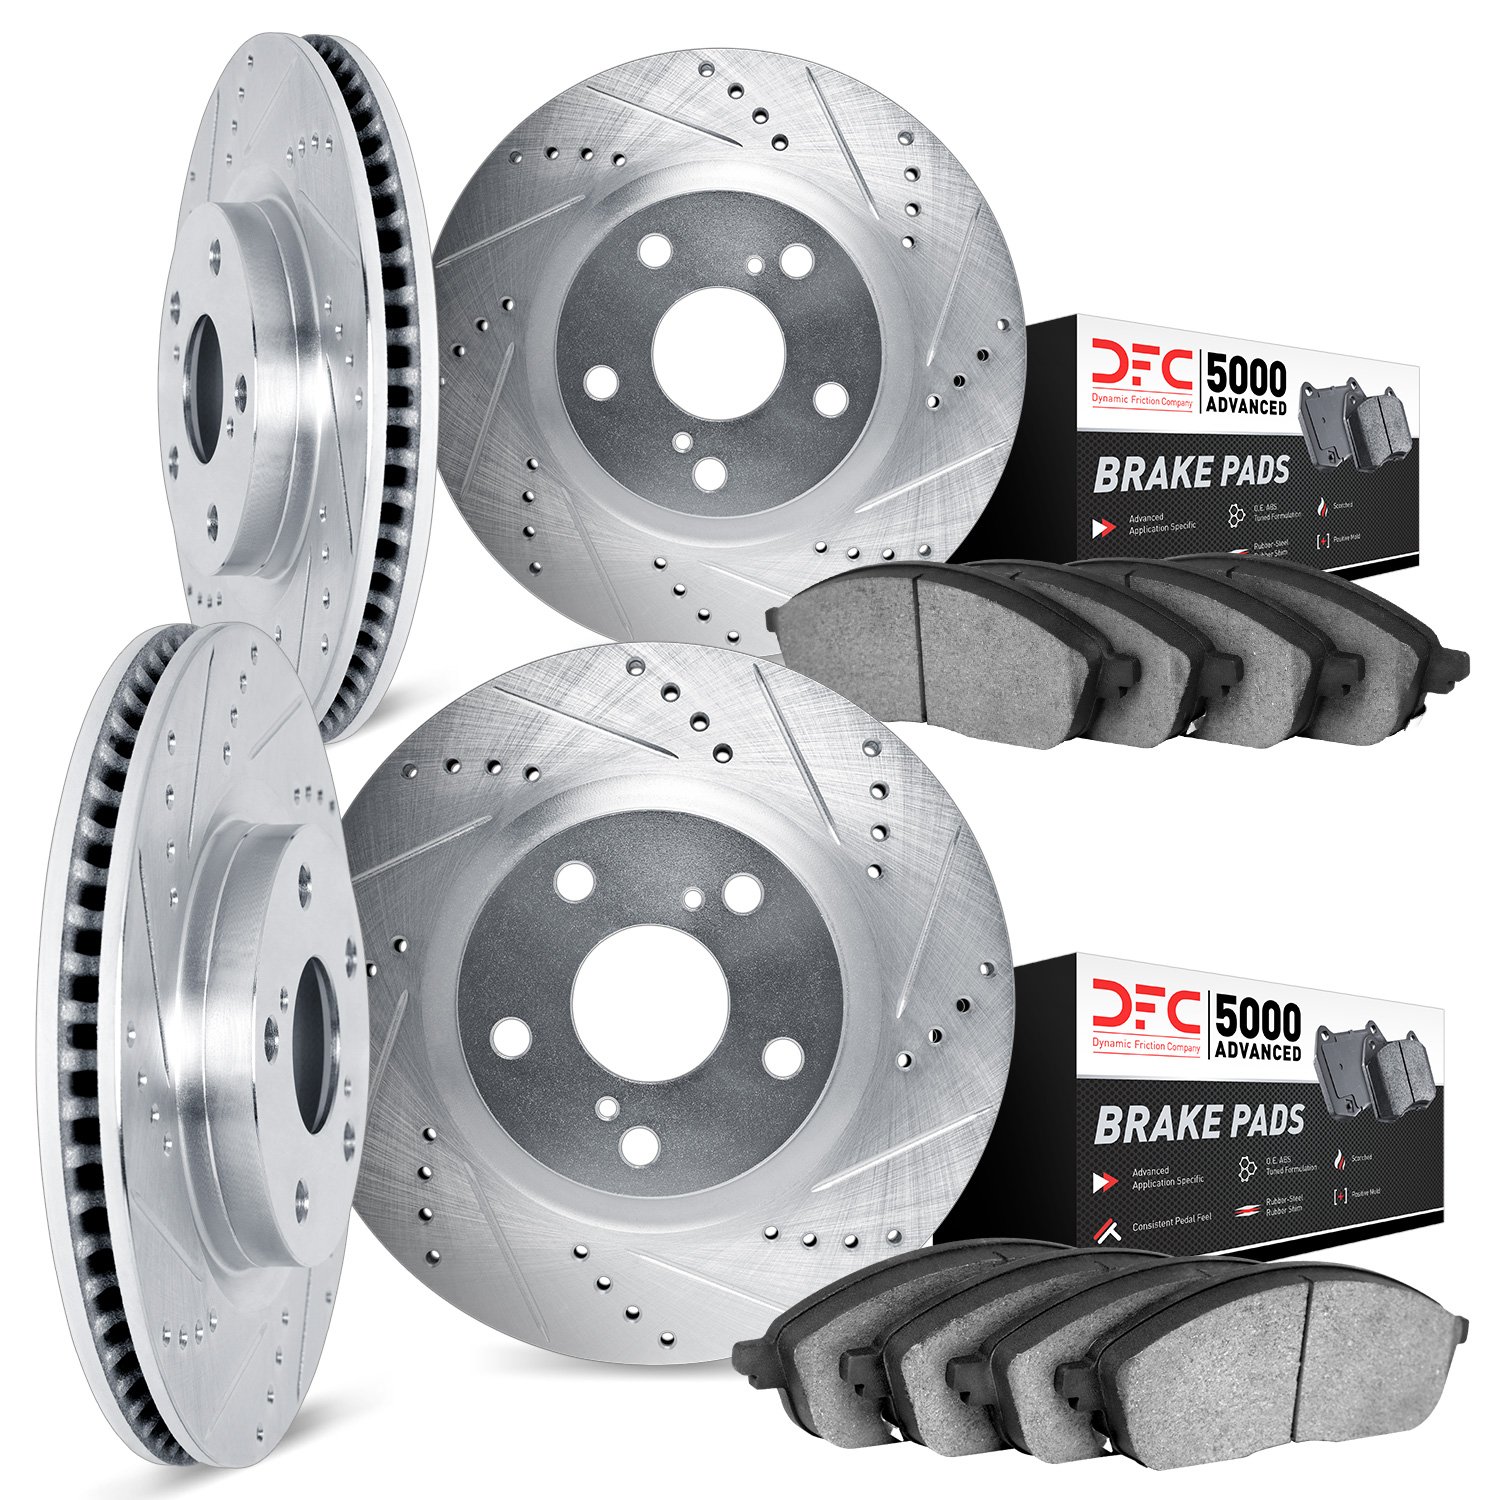 7504-46028 Drilled/Slotted Brake Rotors w/5000 Advanced Brake Pads Kit [Silver], 2009-2015 GM, Position: Front and Rear